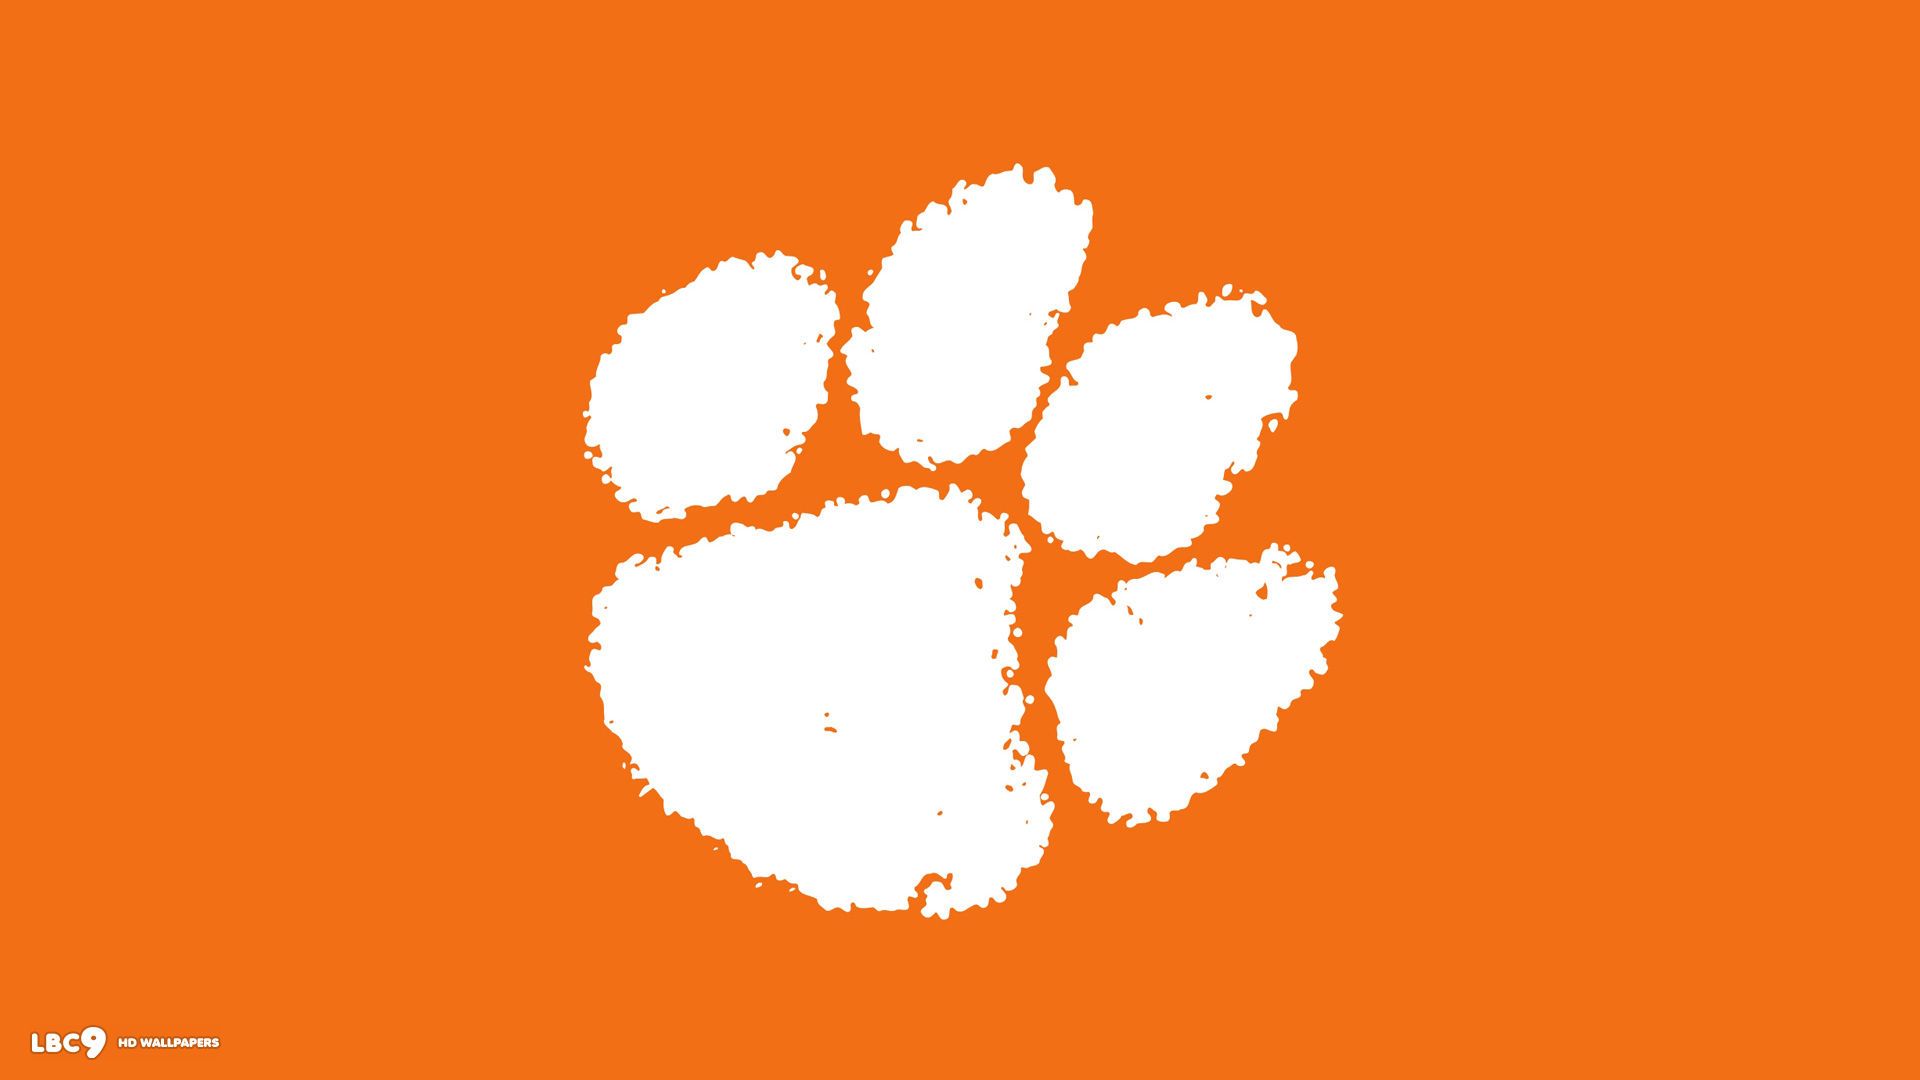 Clemson tigers wallpaper 2 / 2 college athletics hd backgrounds